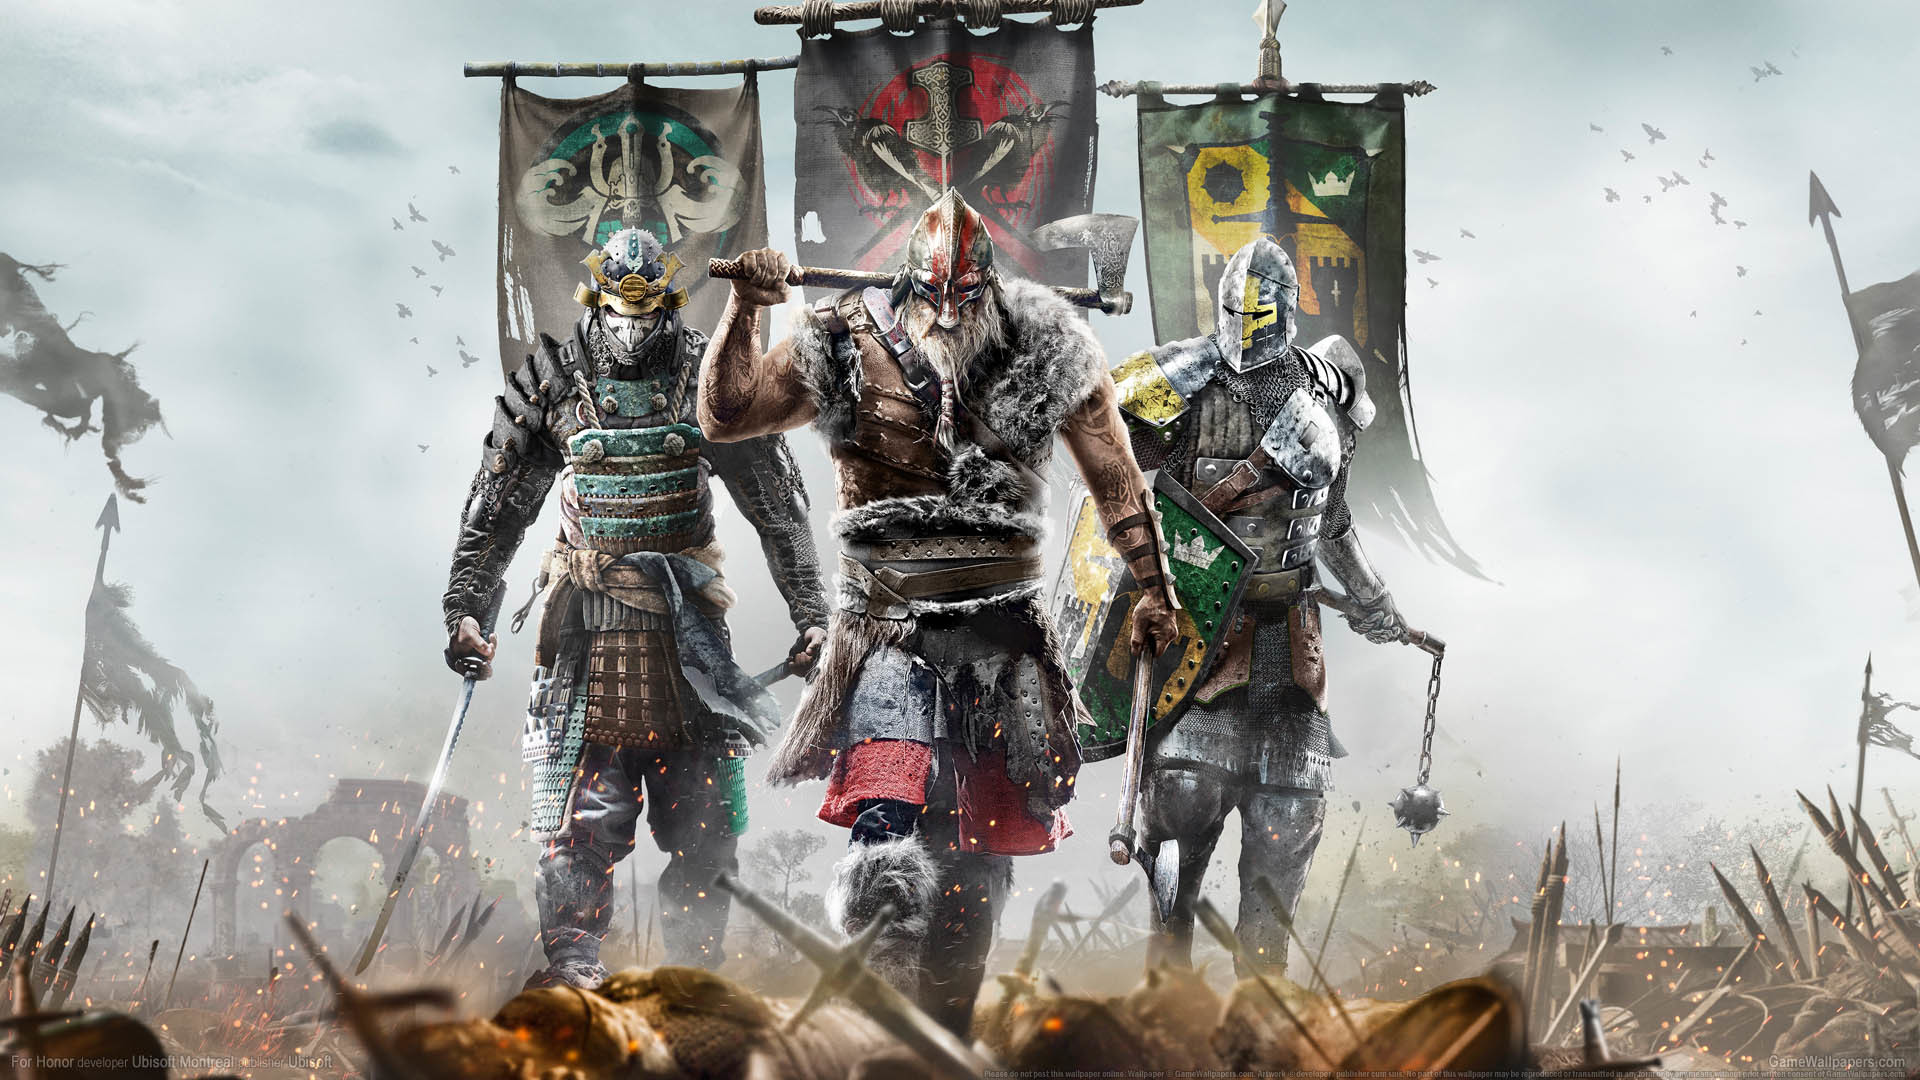 1920x1080 For Honor wallpaper or background For Honor wallpaper or background 01